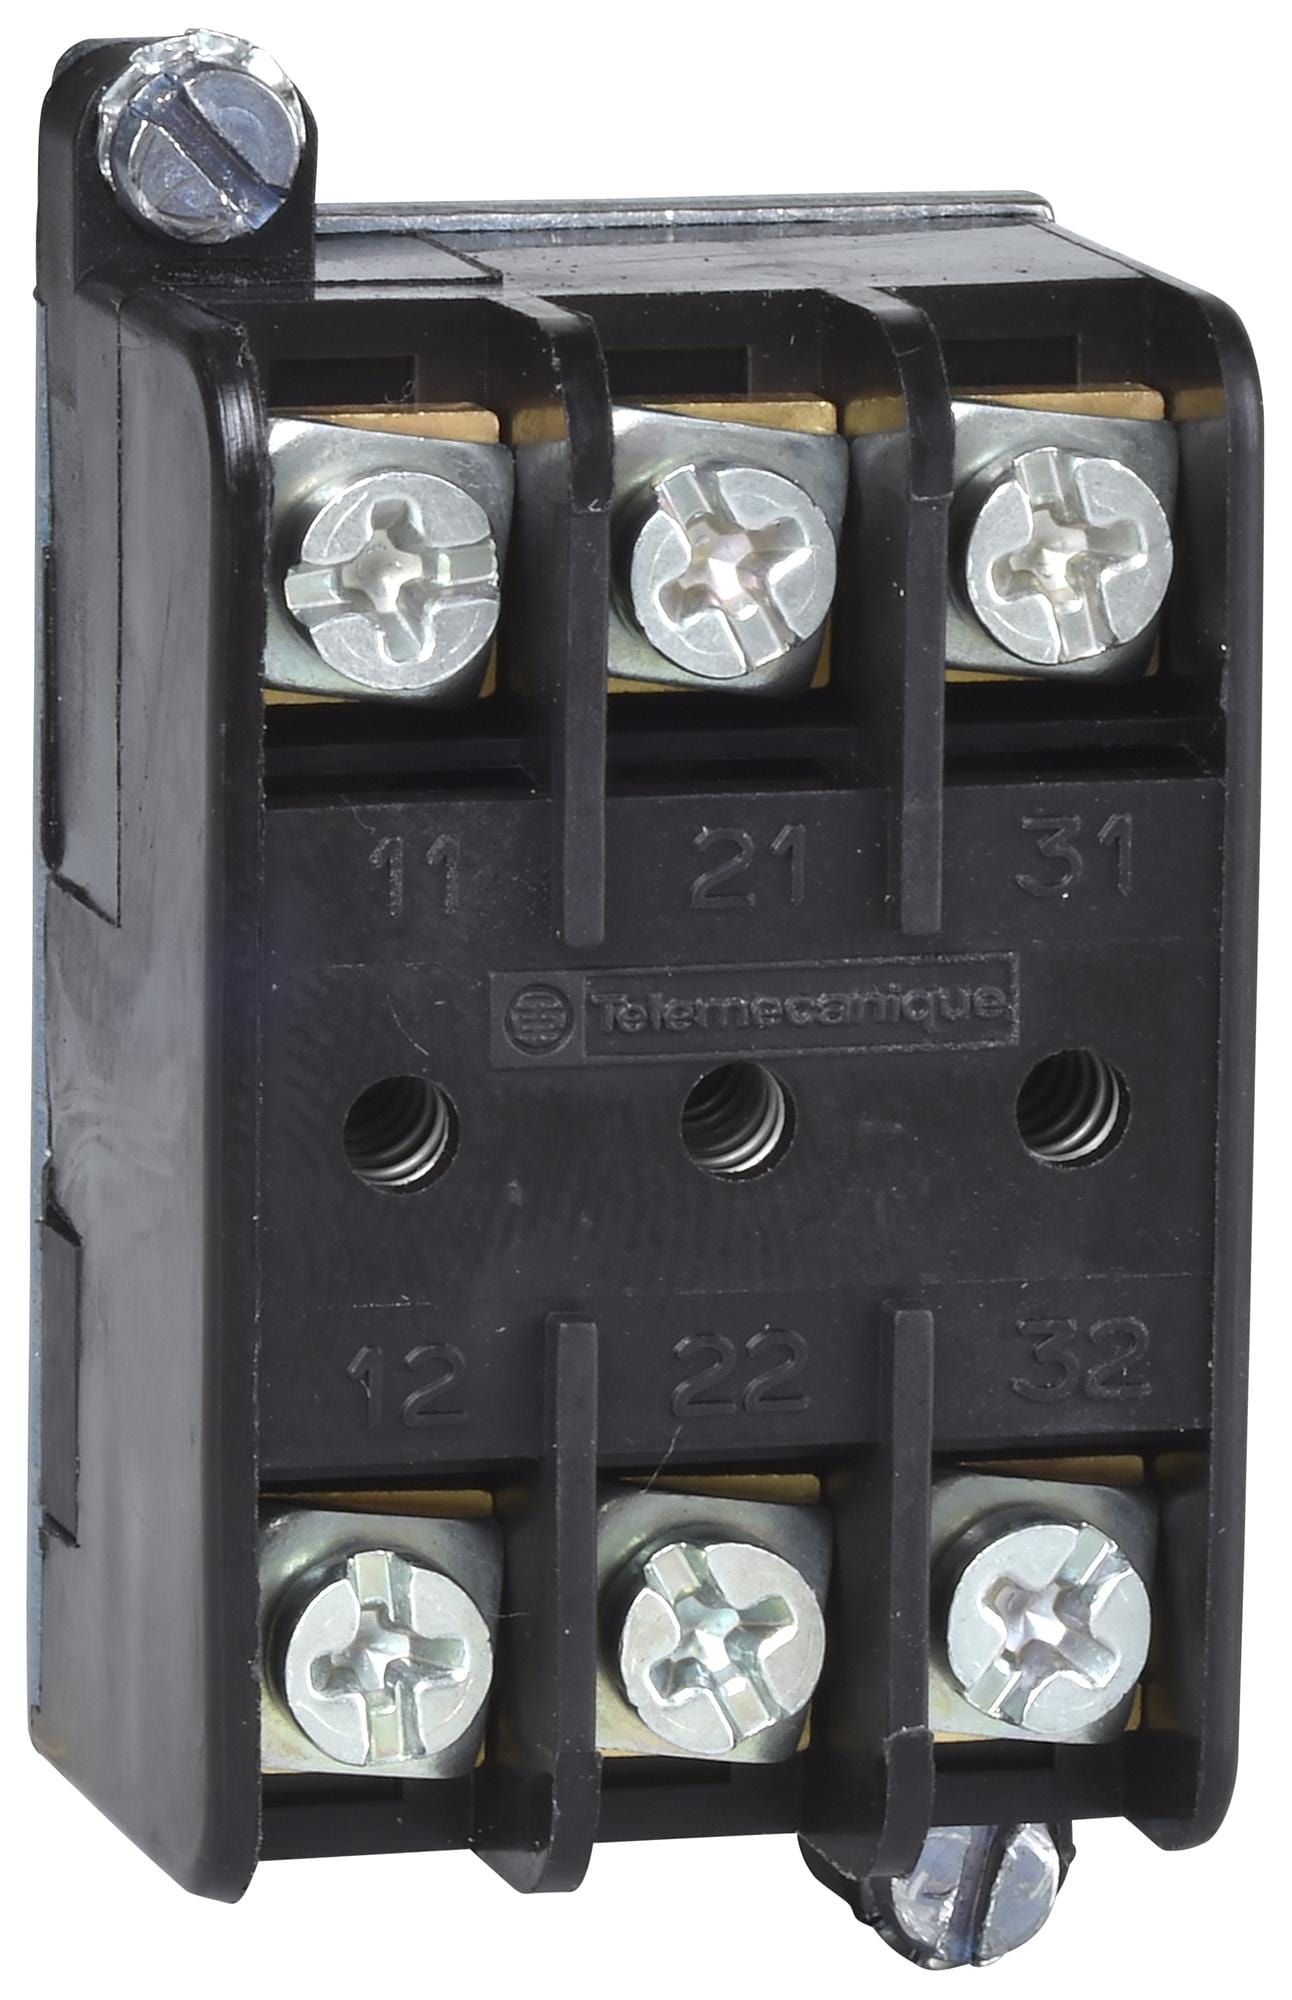 SCHNEIDER ELECTRIC Contact Blocks XENT1192 CONTACT BLOCK SCHNEIDER ELECTRIC 3114866 XENT1192